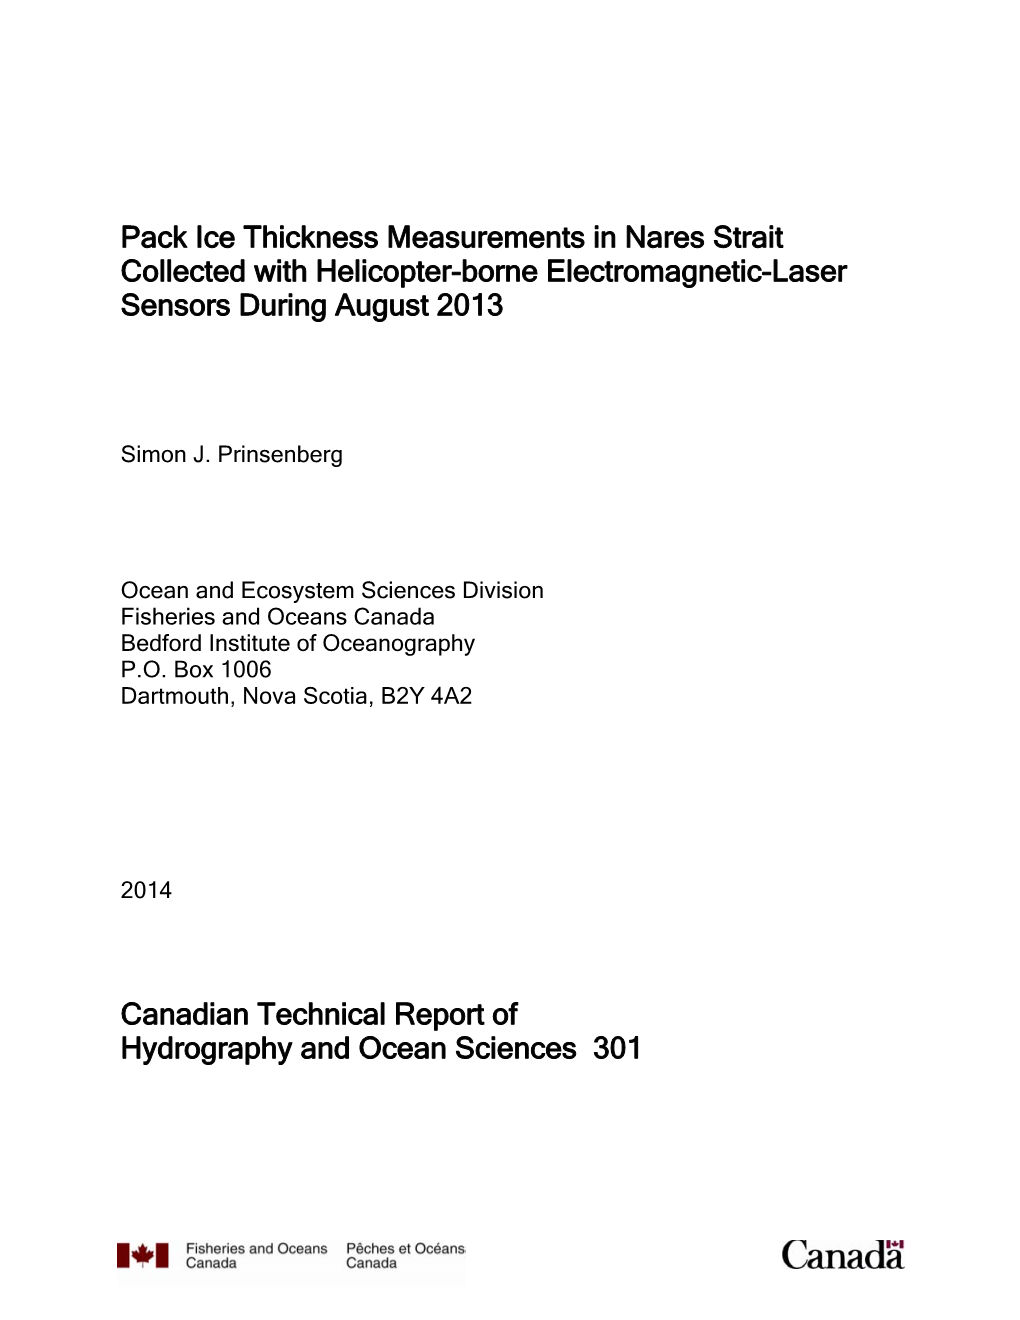 Pack Ice Thickness Measurements in Nares Strait Collected with Helicopter-Borne Electromagnetic-Laser Sensors During August 2013